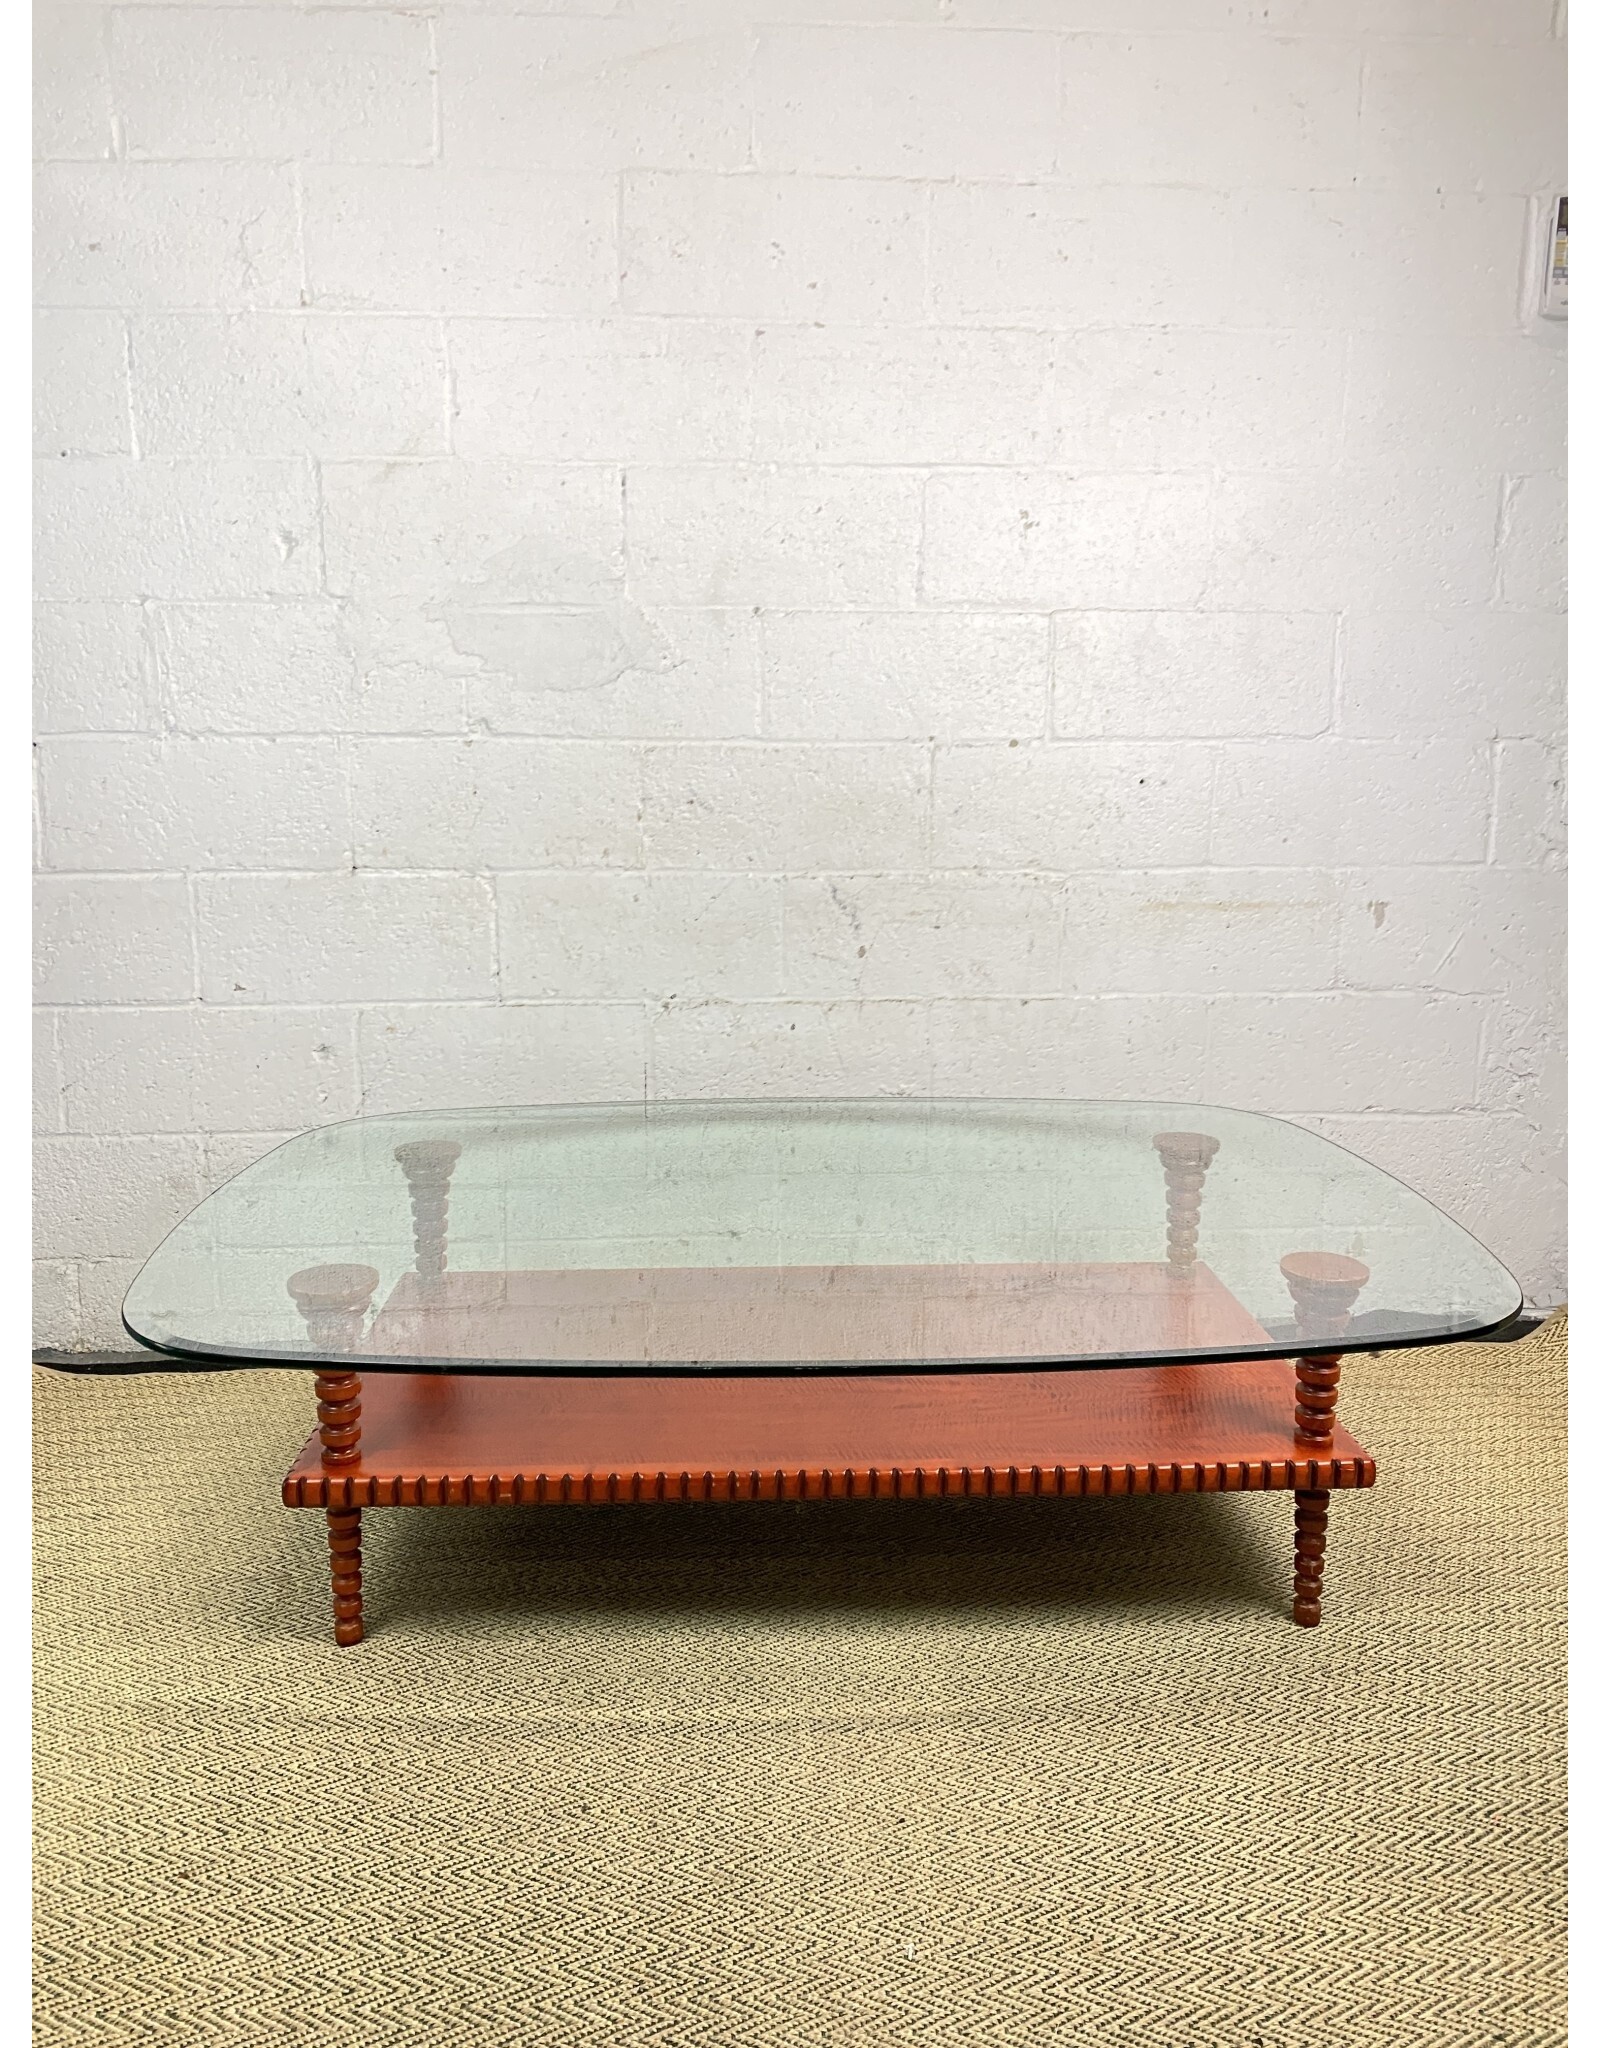 Contemporary Postmodern Dialogica Rectangular Coffee Table with Glass Top